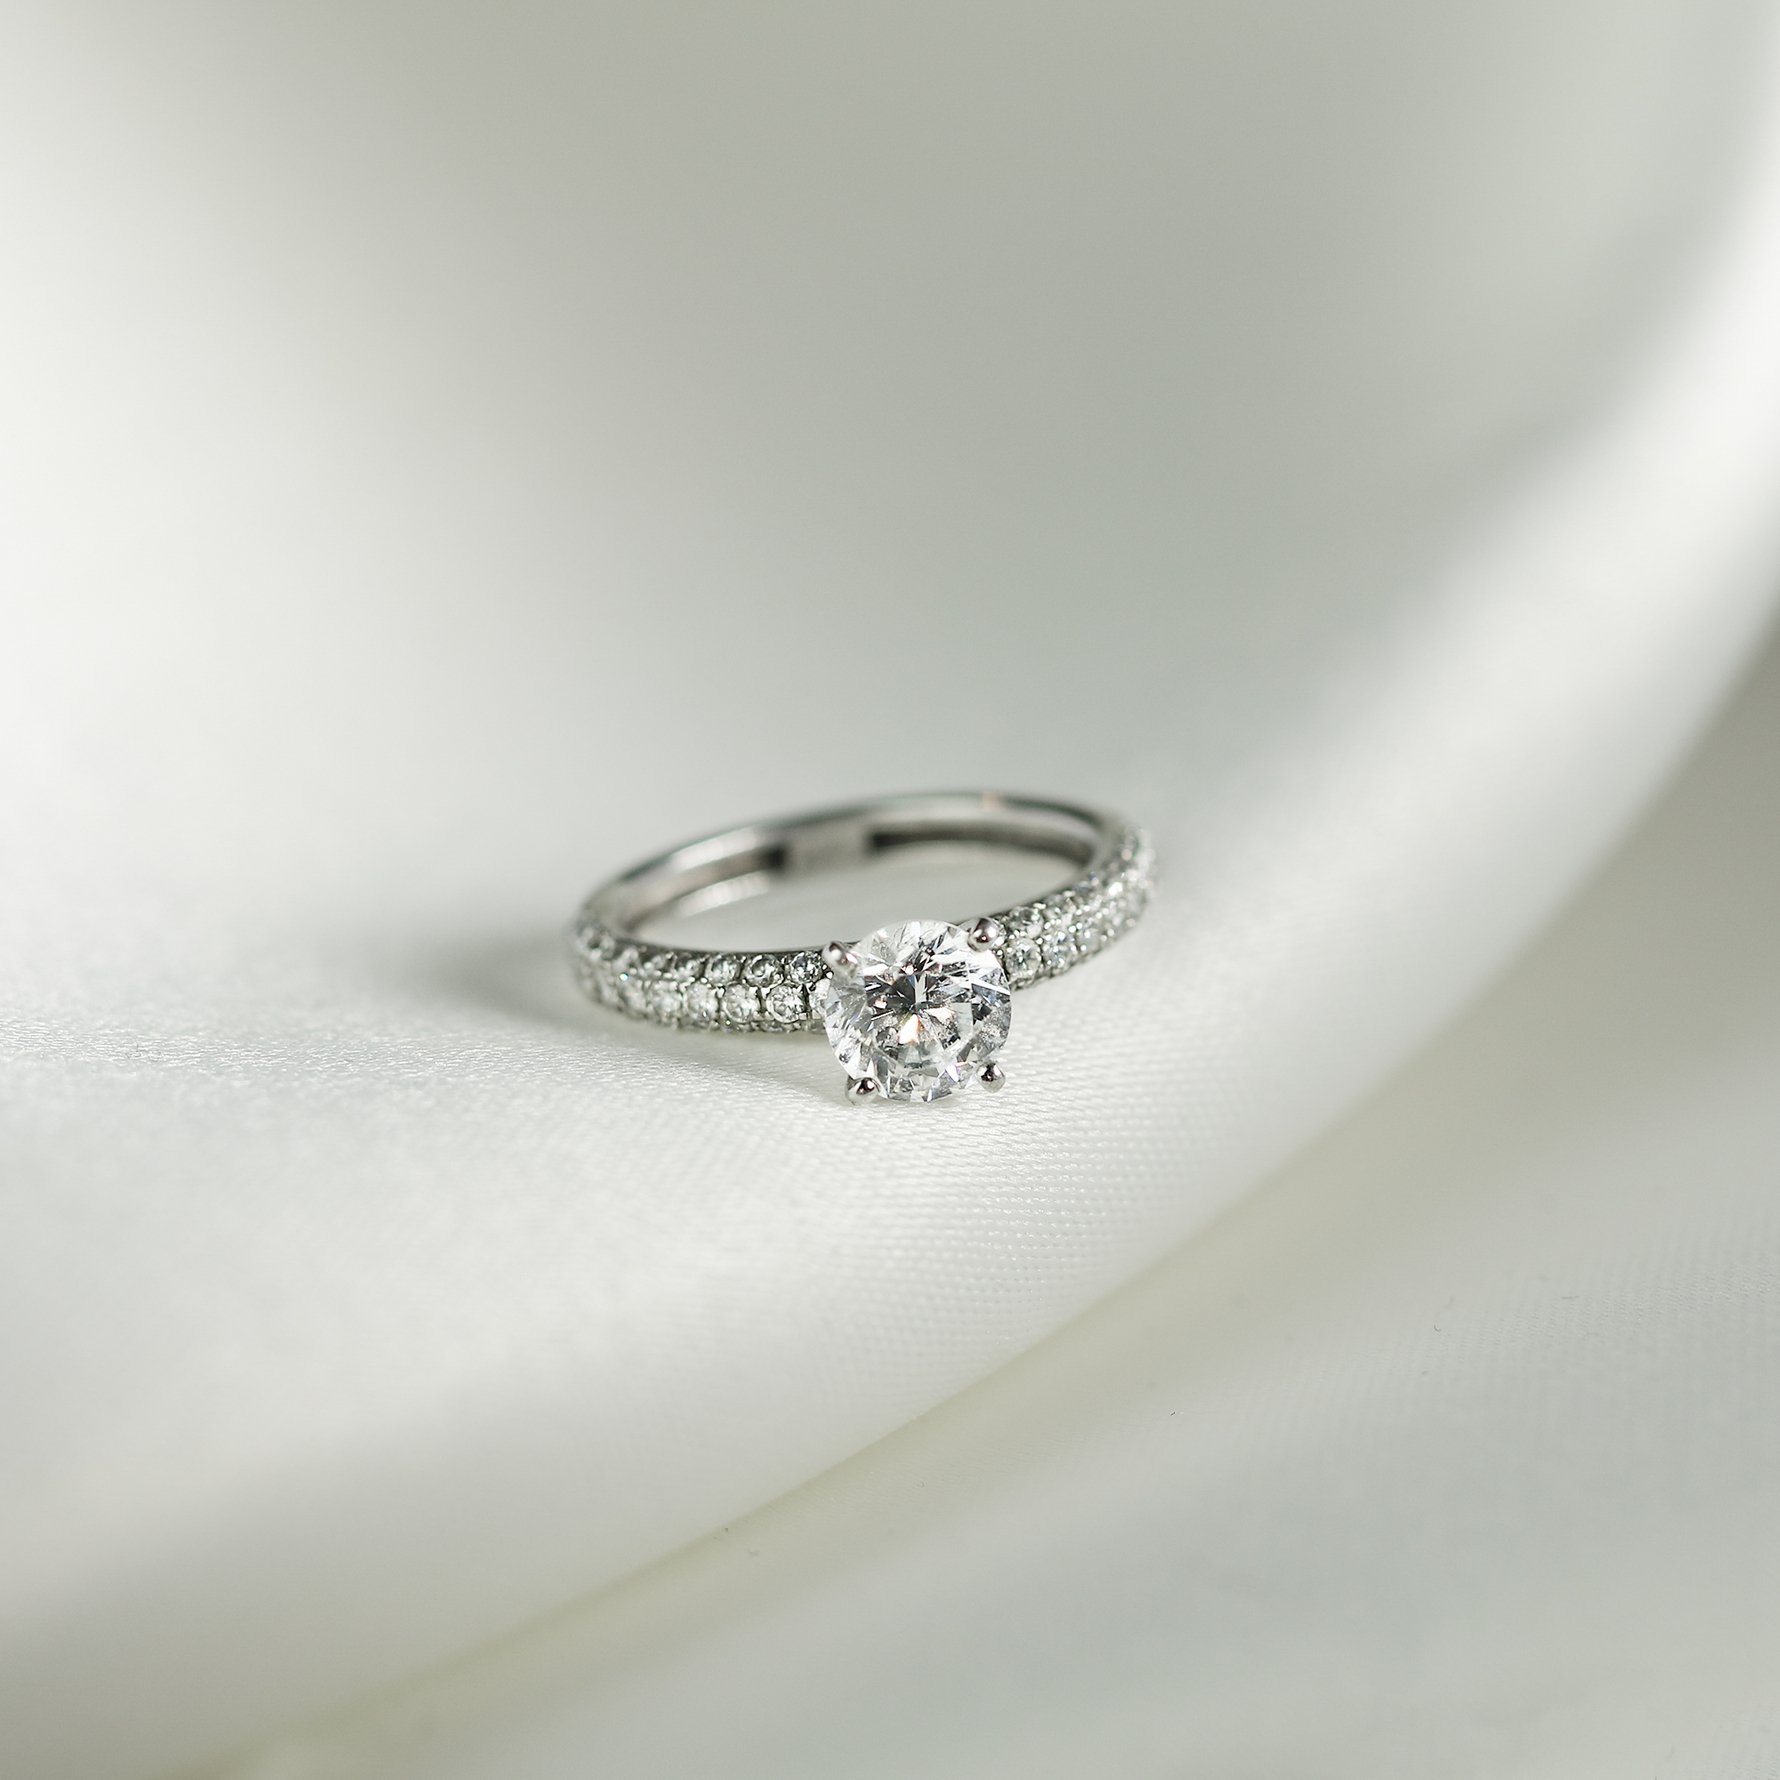 How to buy a solitaire ring?